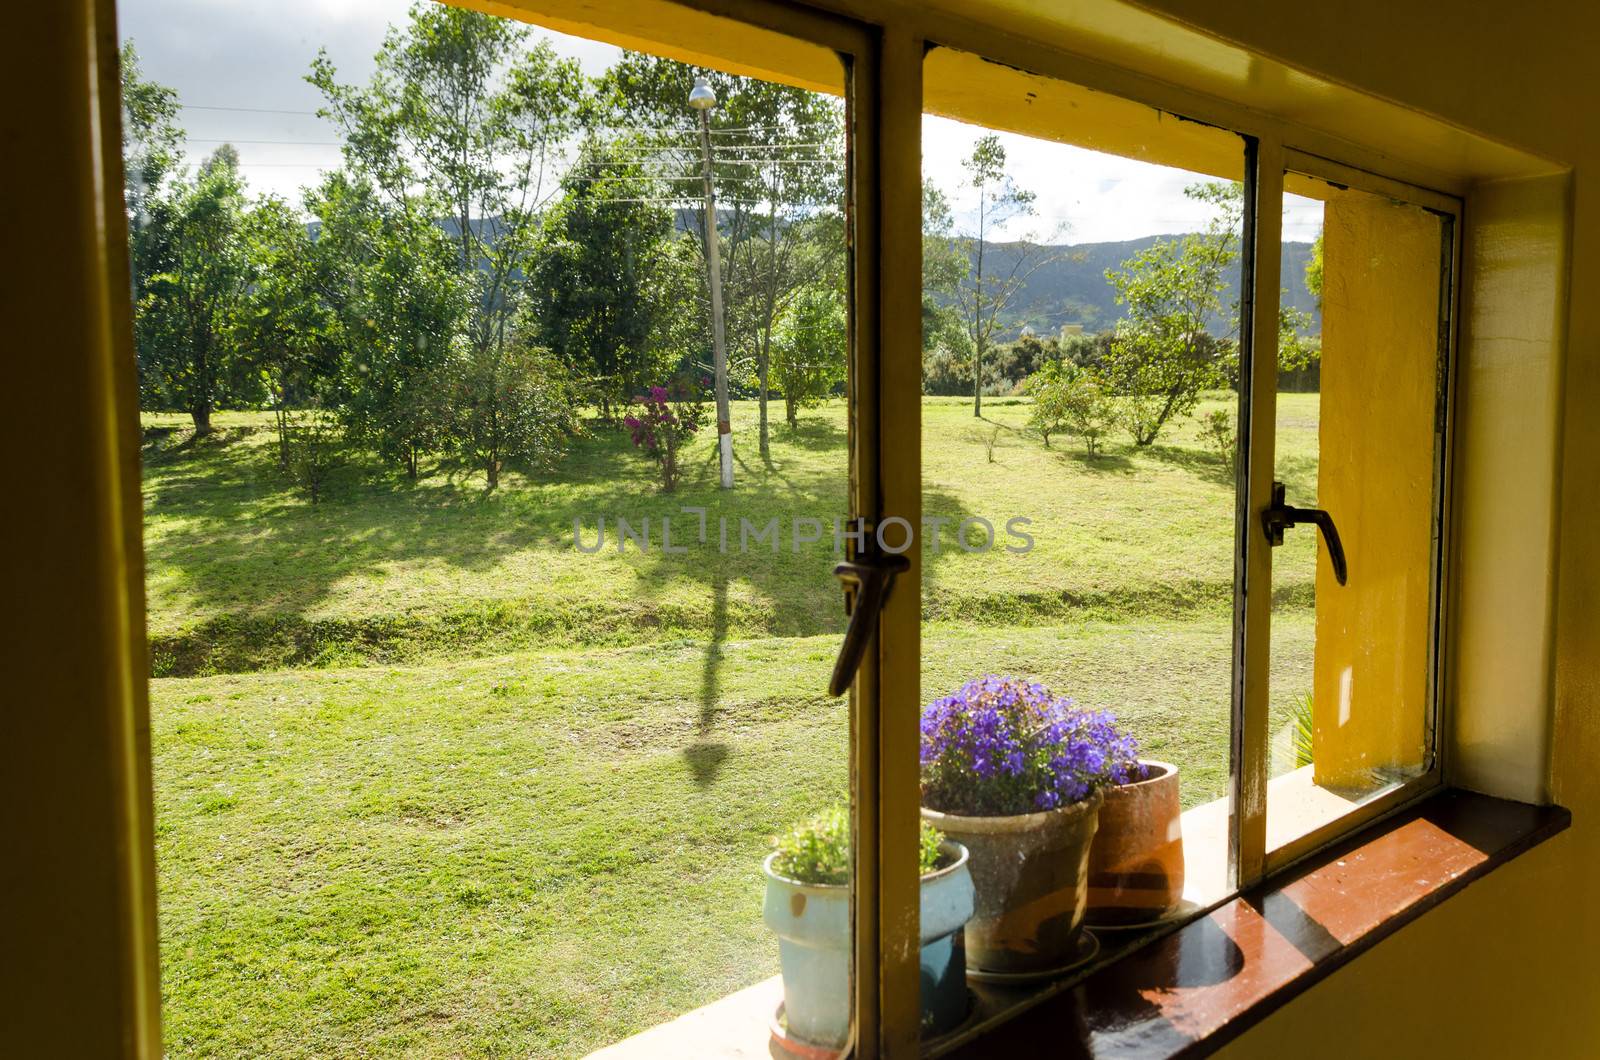 Windowsill and flowers in Neusa in Cundinamarca, Colombia